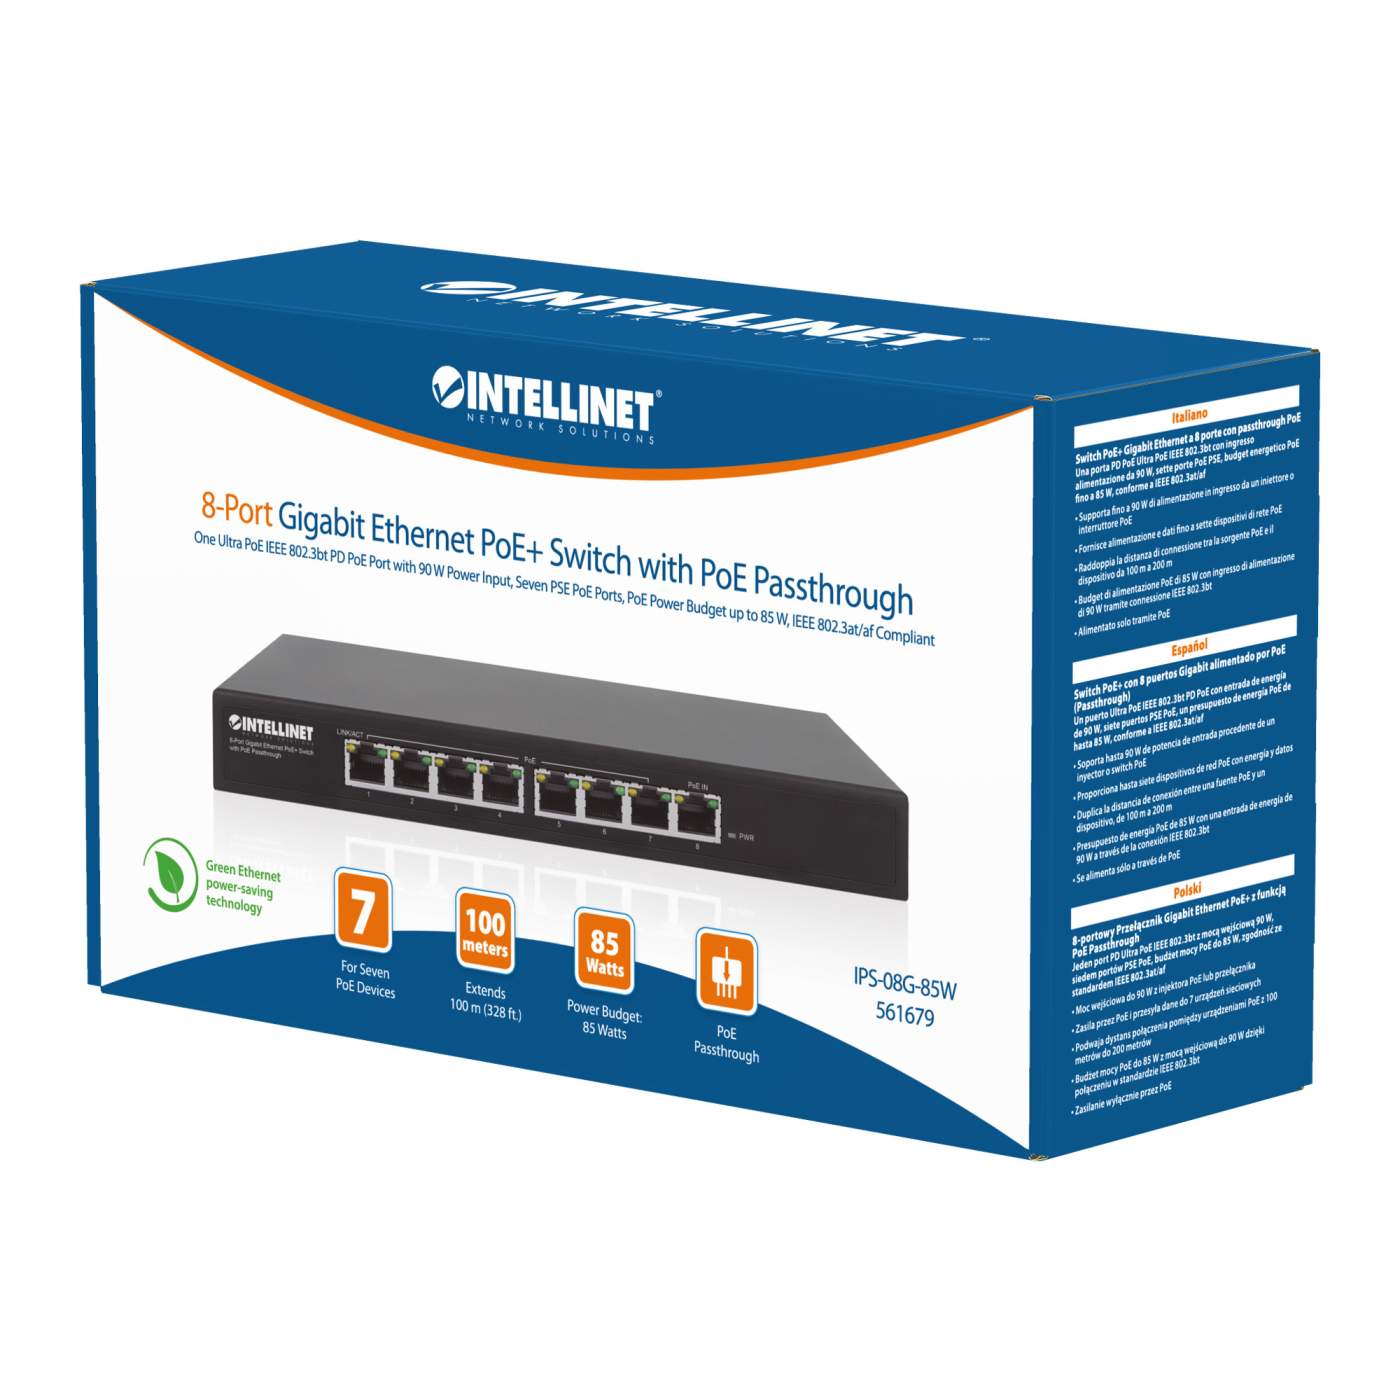 PoE-Powered 8-Port Gigabit Ethernet PoE+ Switch with PoE Passthrough Packaging Image 2